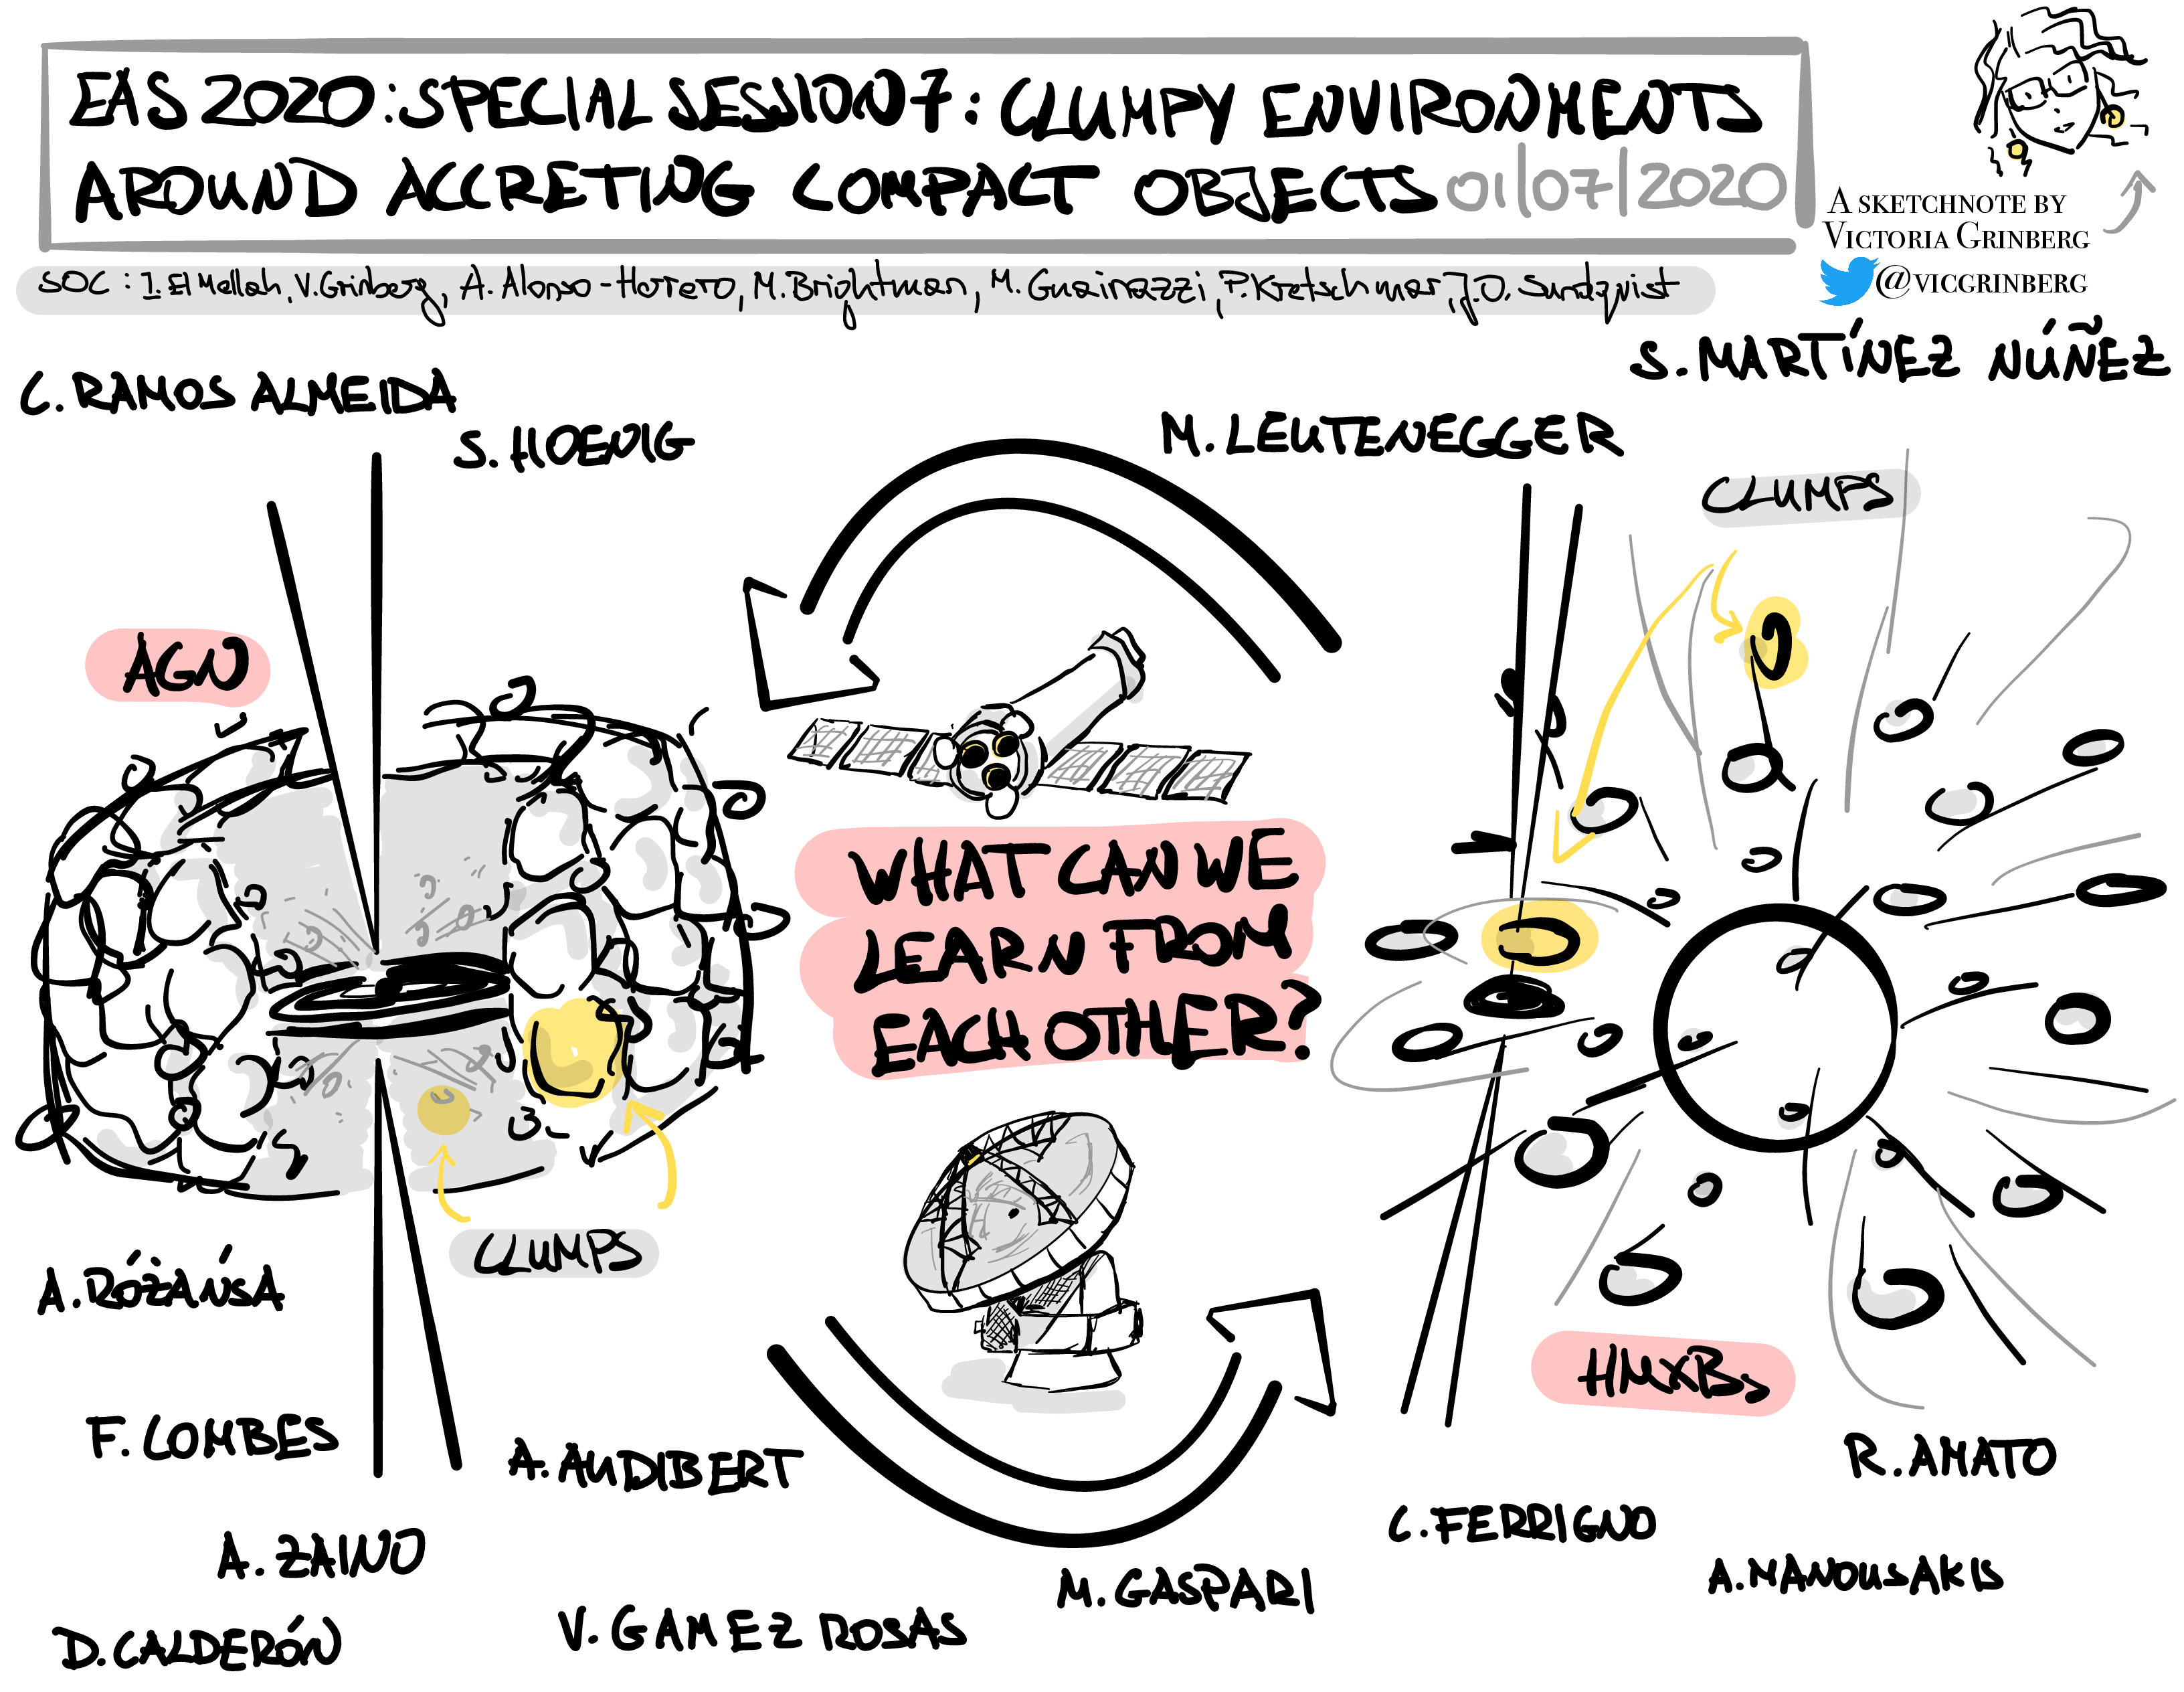 Sketchnote for a conference session. Session title 'EAS 2020: Special Session 7: Clumpy environments around accreting compact objects 01/07/2020'. Sketch consists of AGN and HMXB pictures connected by arrows pointing from one to other and back, between them sketched of a space and a ground basees  telescopes and the question 'what can we learn from each other?'. Names of all speakers listed additionally.